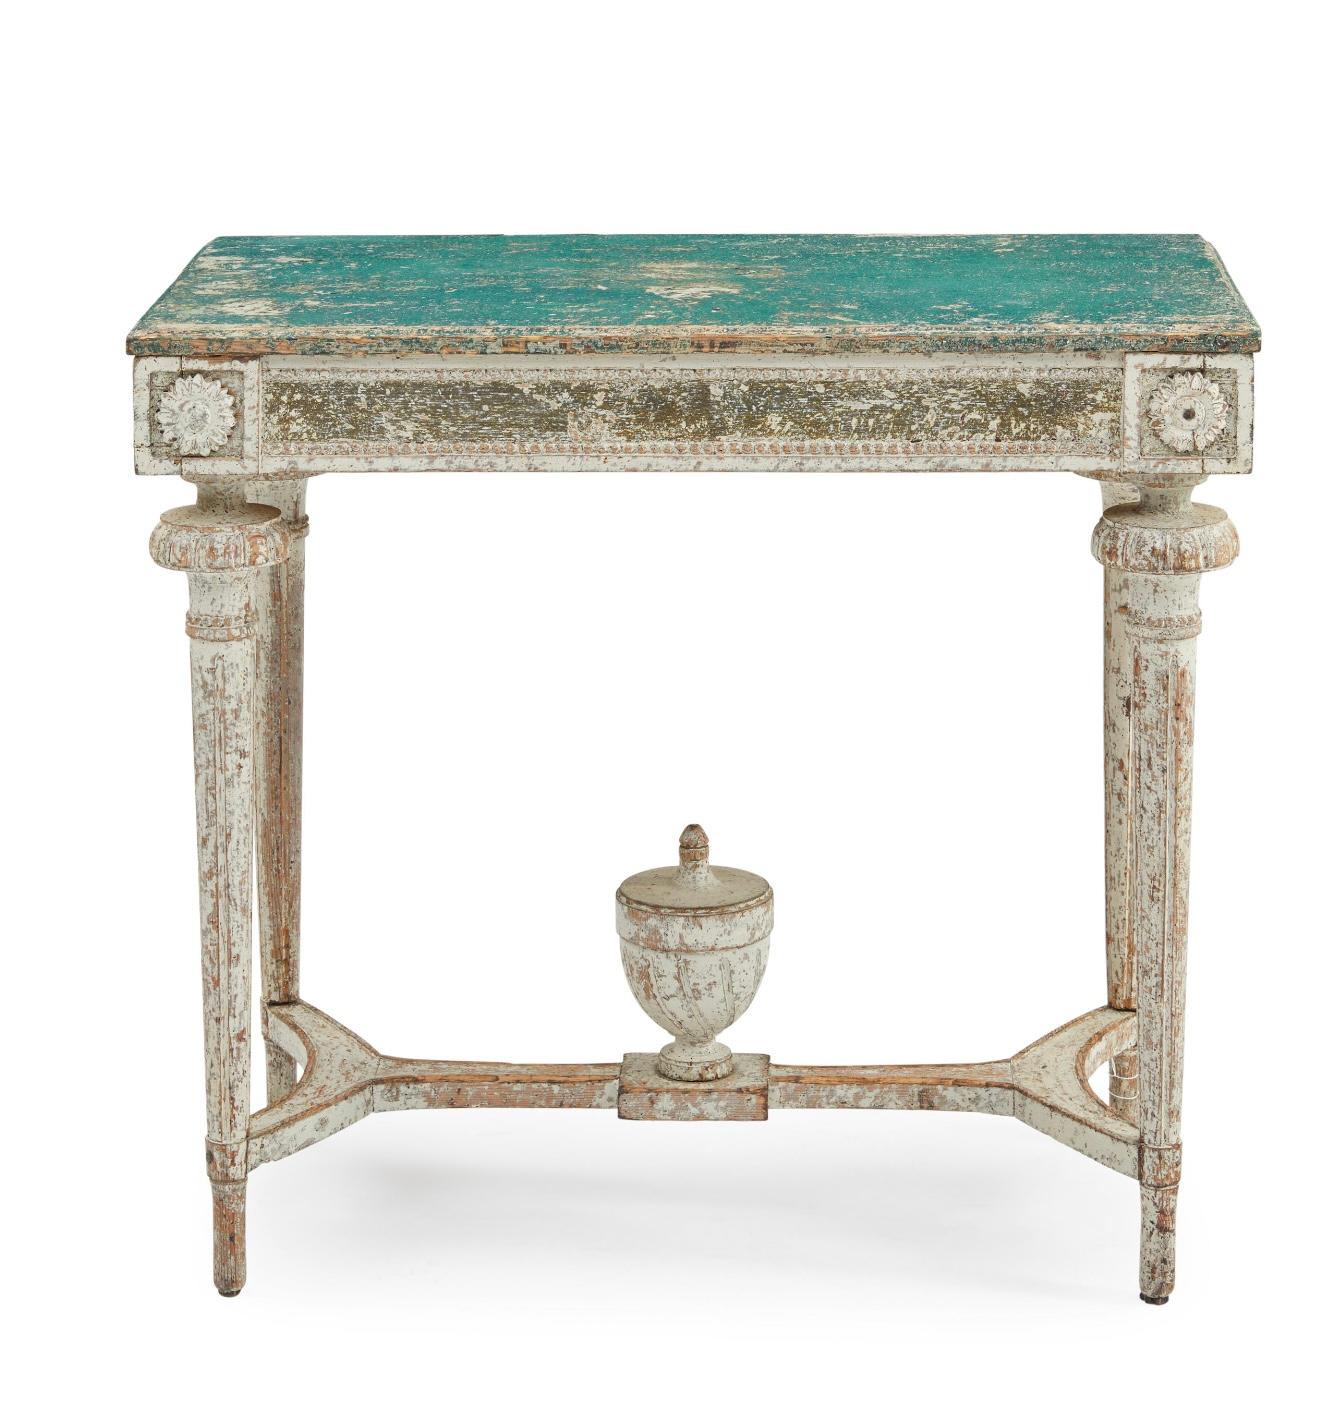 Early 19th Century Swedish Gustavian Polychrome Painted Console Table, Circa 1810. Fabulous antique Swedish Gustavian freestanding console table featuring original greyish green, blue and creamy white polychrome hand painted finish. All worn to a